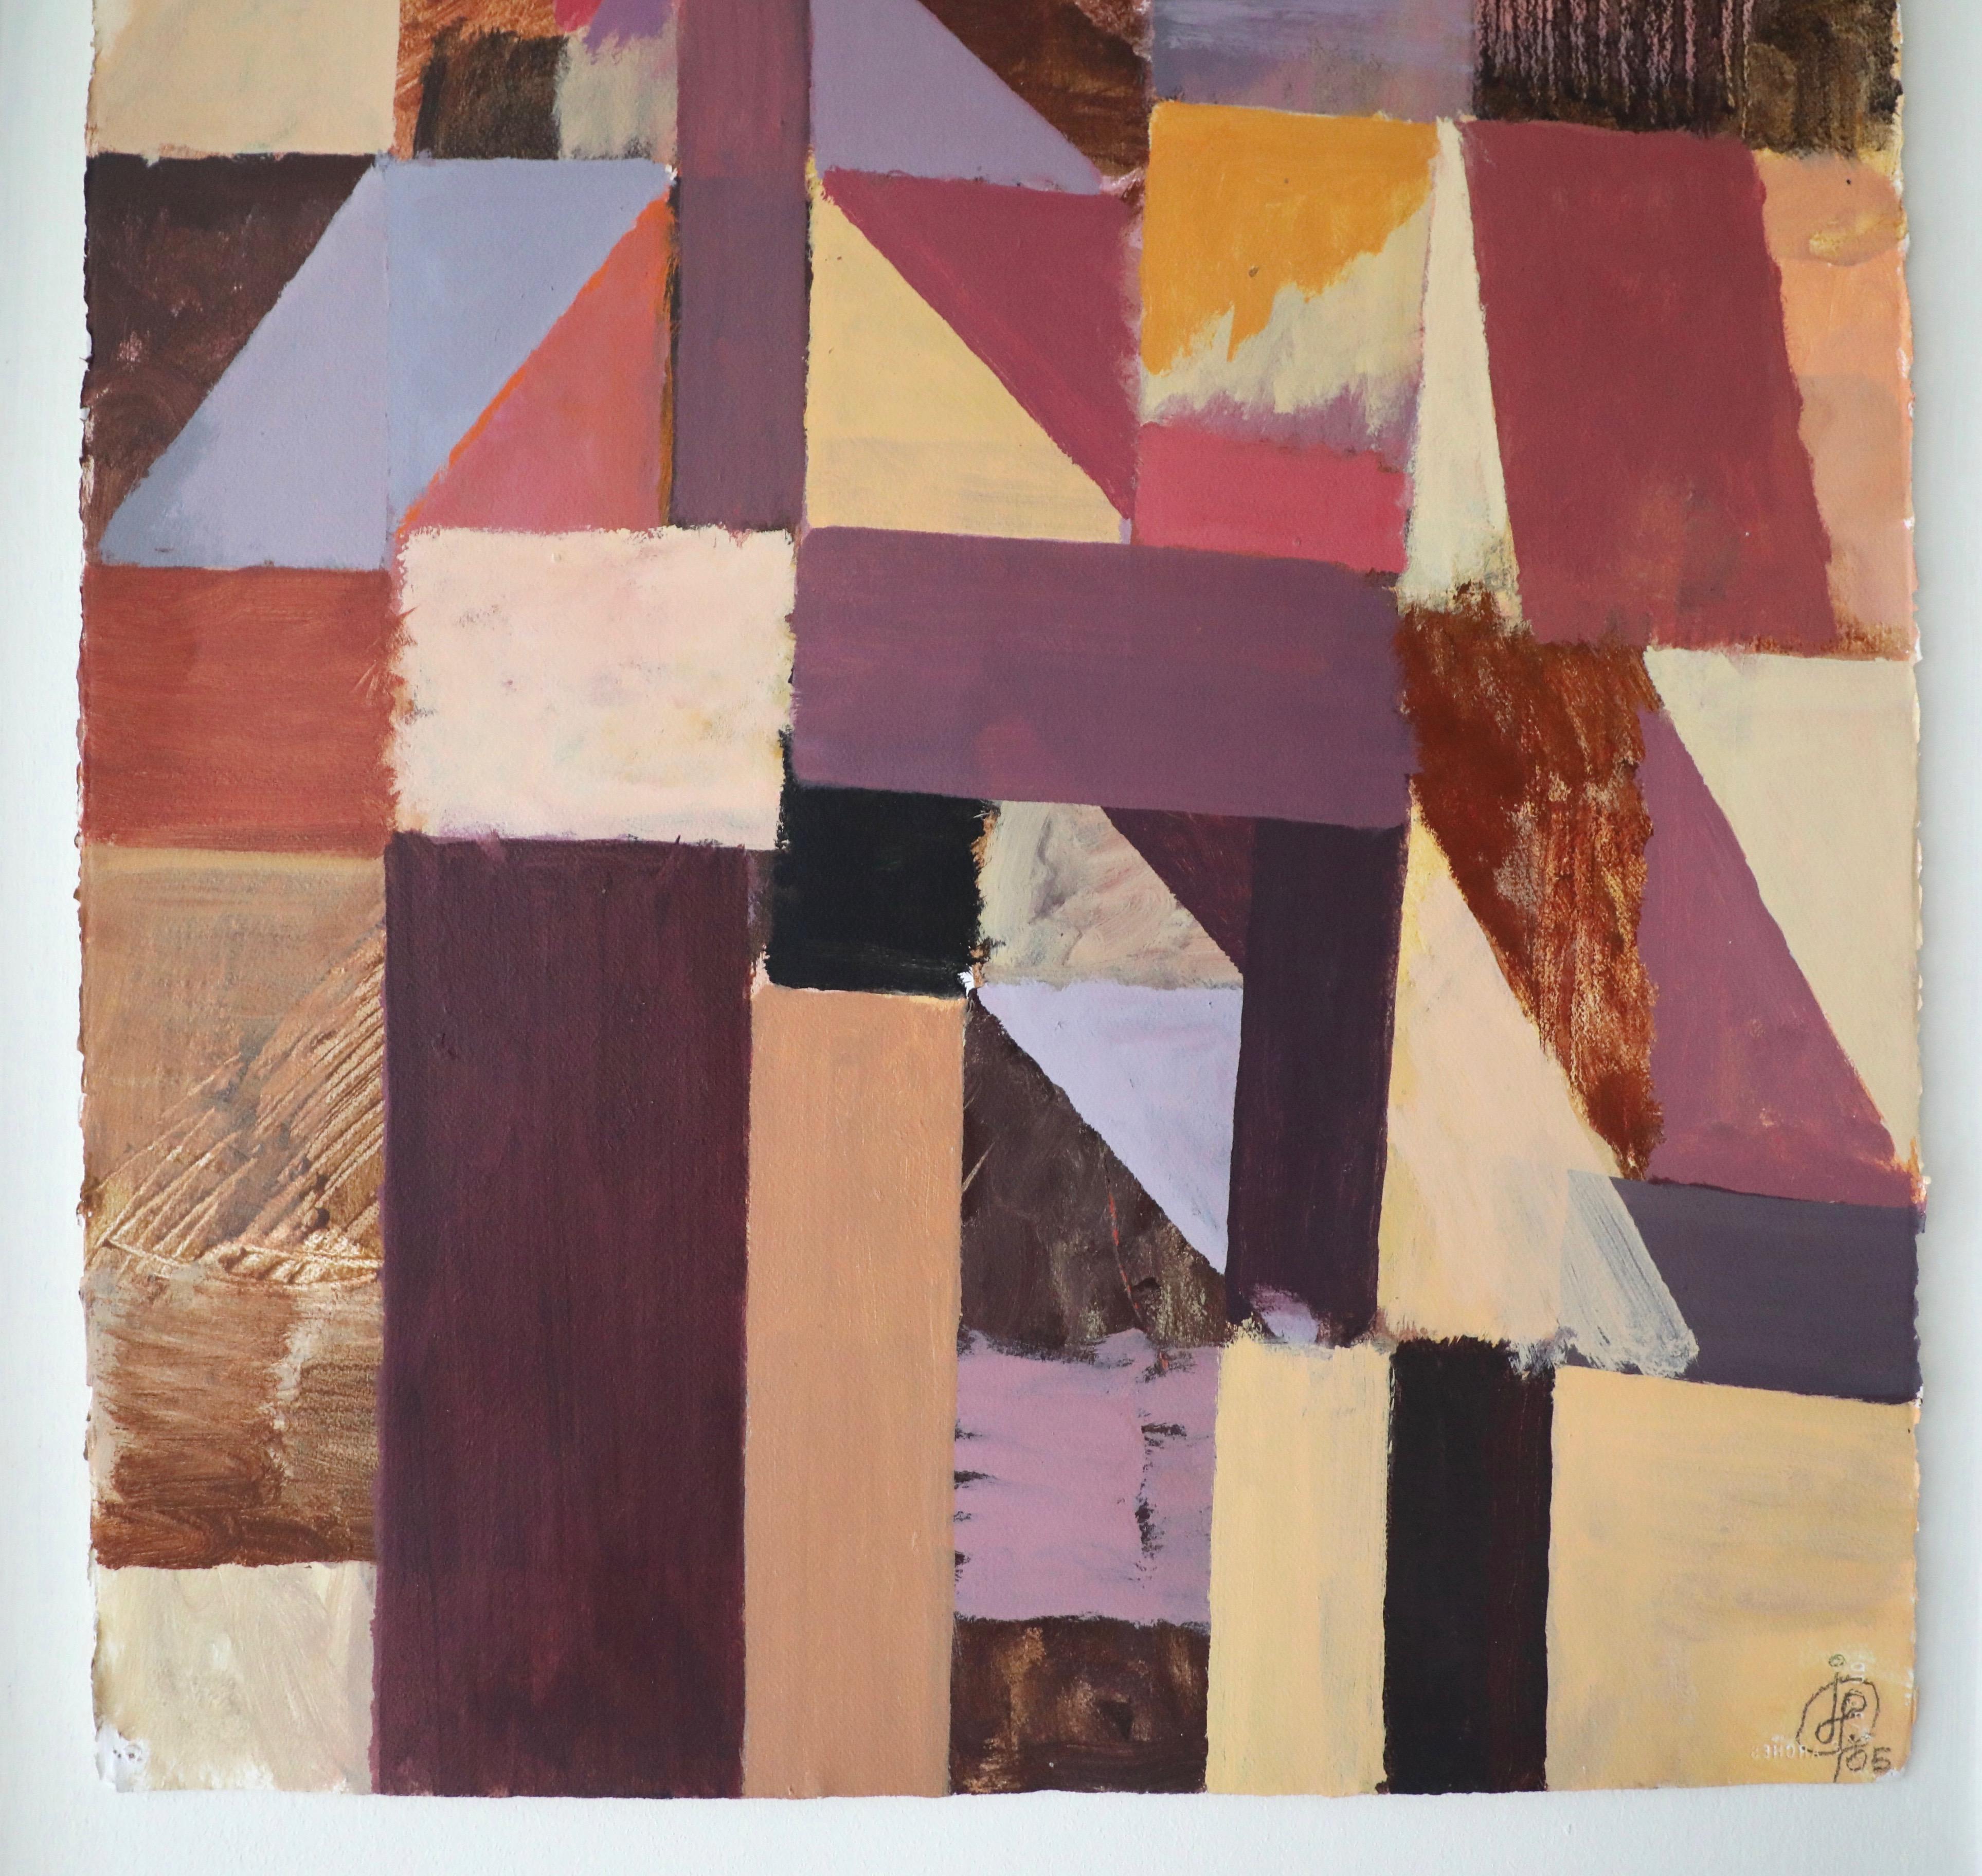 This is an abstract work on paper completed in 2005, making it one of the last pieces Irving Haynes completed before he passed away.  Haynes' use of line and shape is clearly a nod to his training as an architect.  But his innovative use of color --